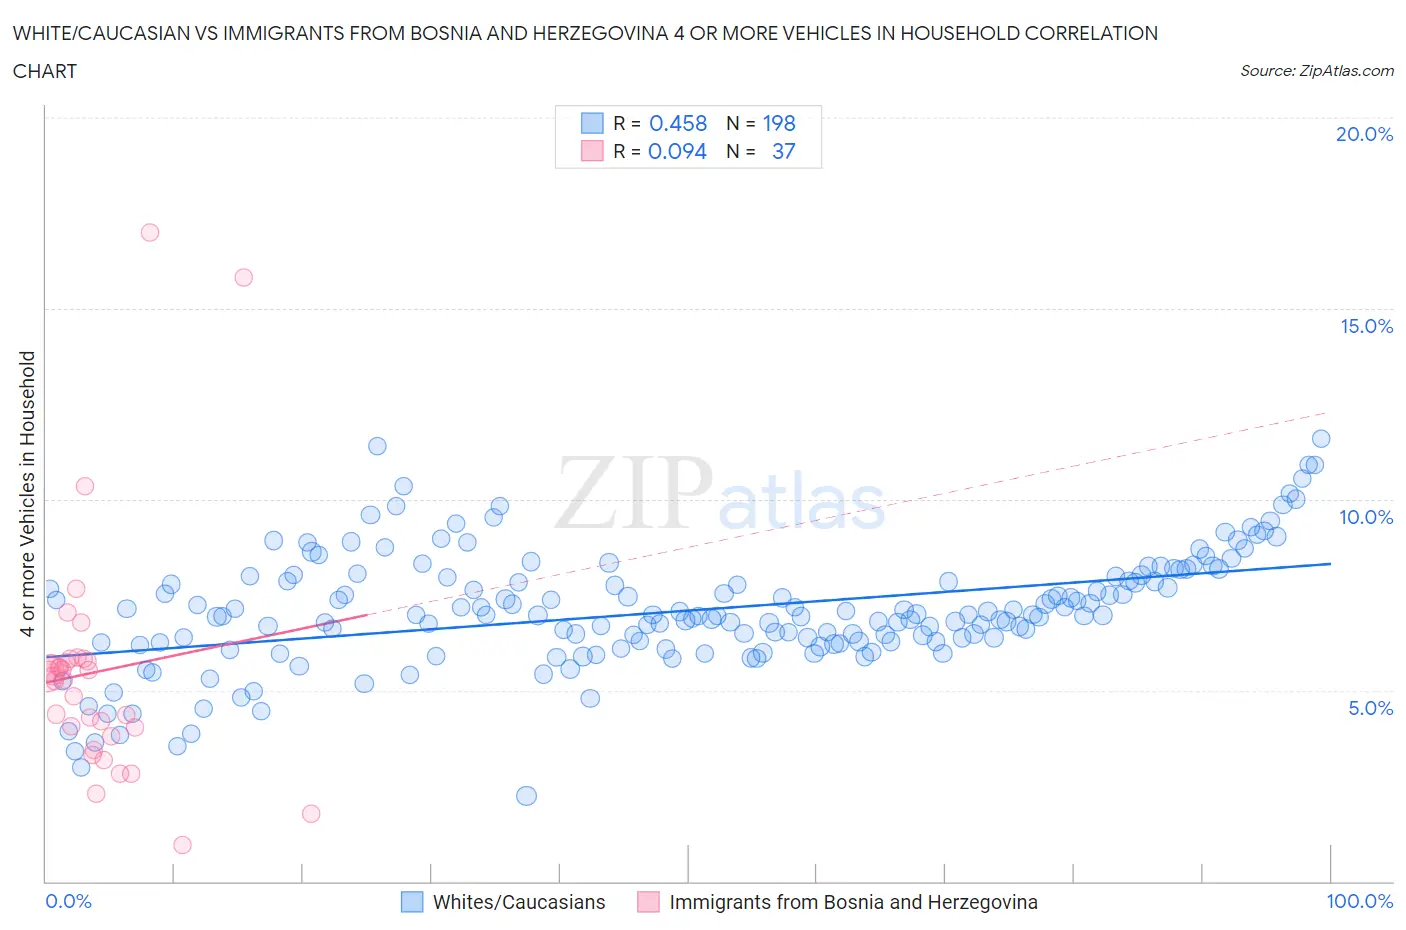 White/Caucasian vs Immigrants from Bosnia and Herzegovina 4 or more Vehicles in Household